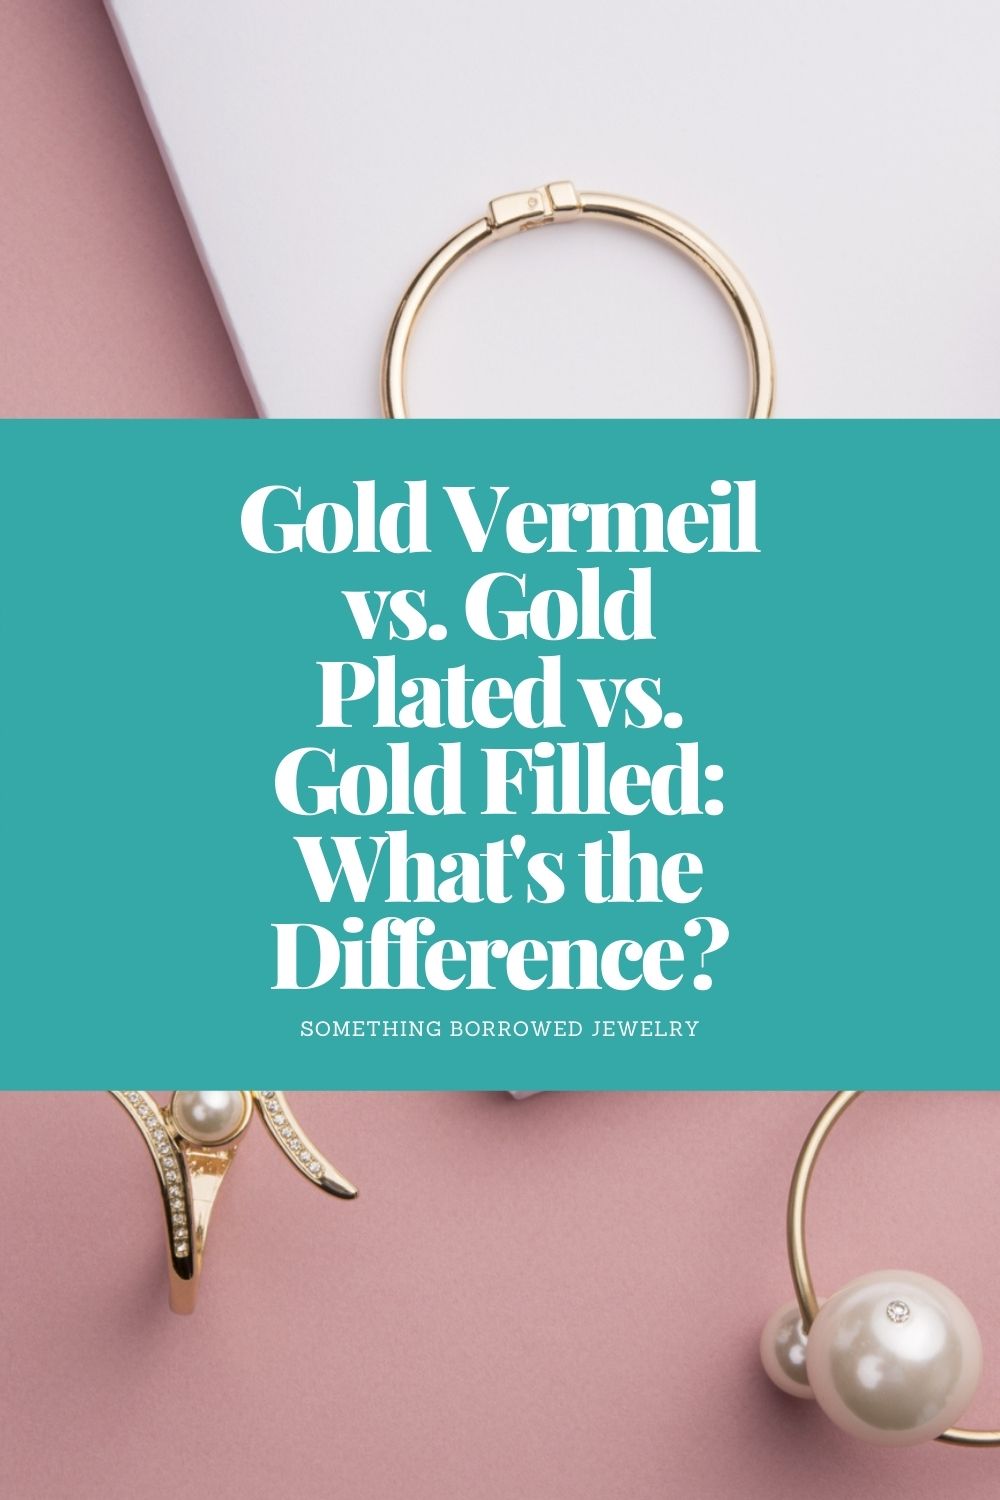 Gold Vermeil vs. Gold Plated vs. Gold Filled What's the Difference pin 2